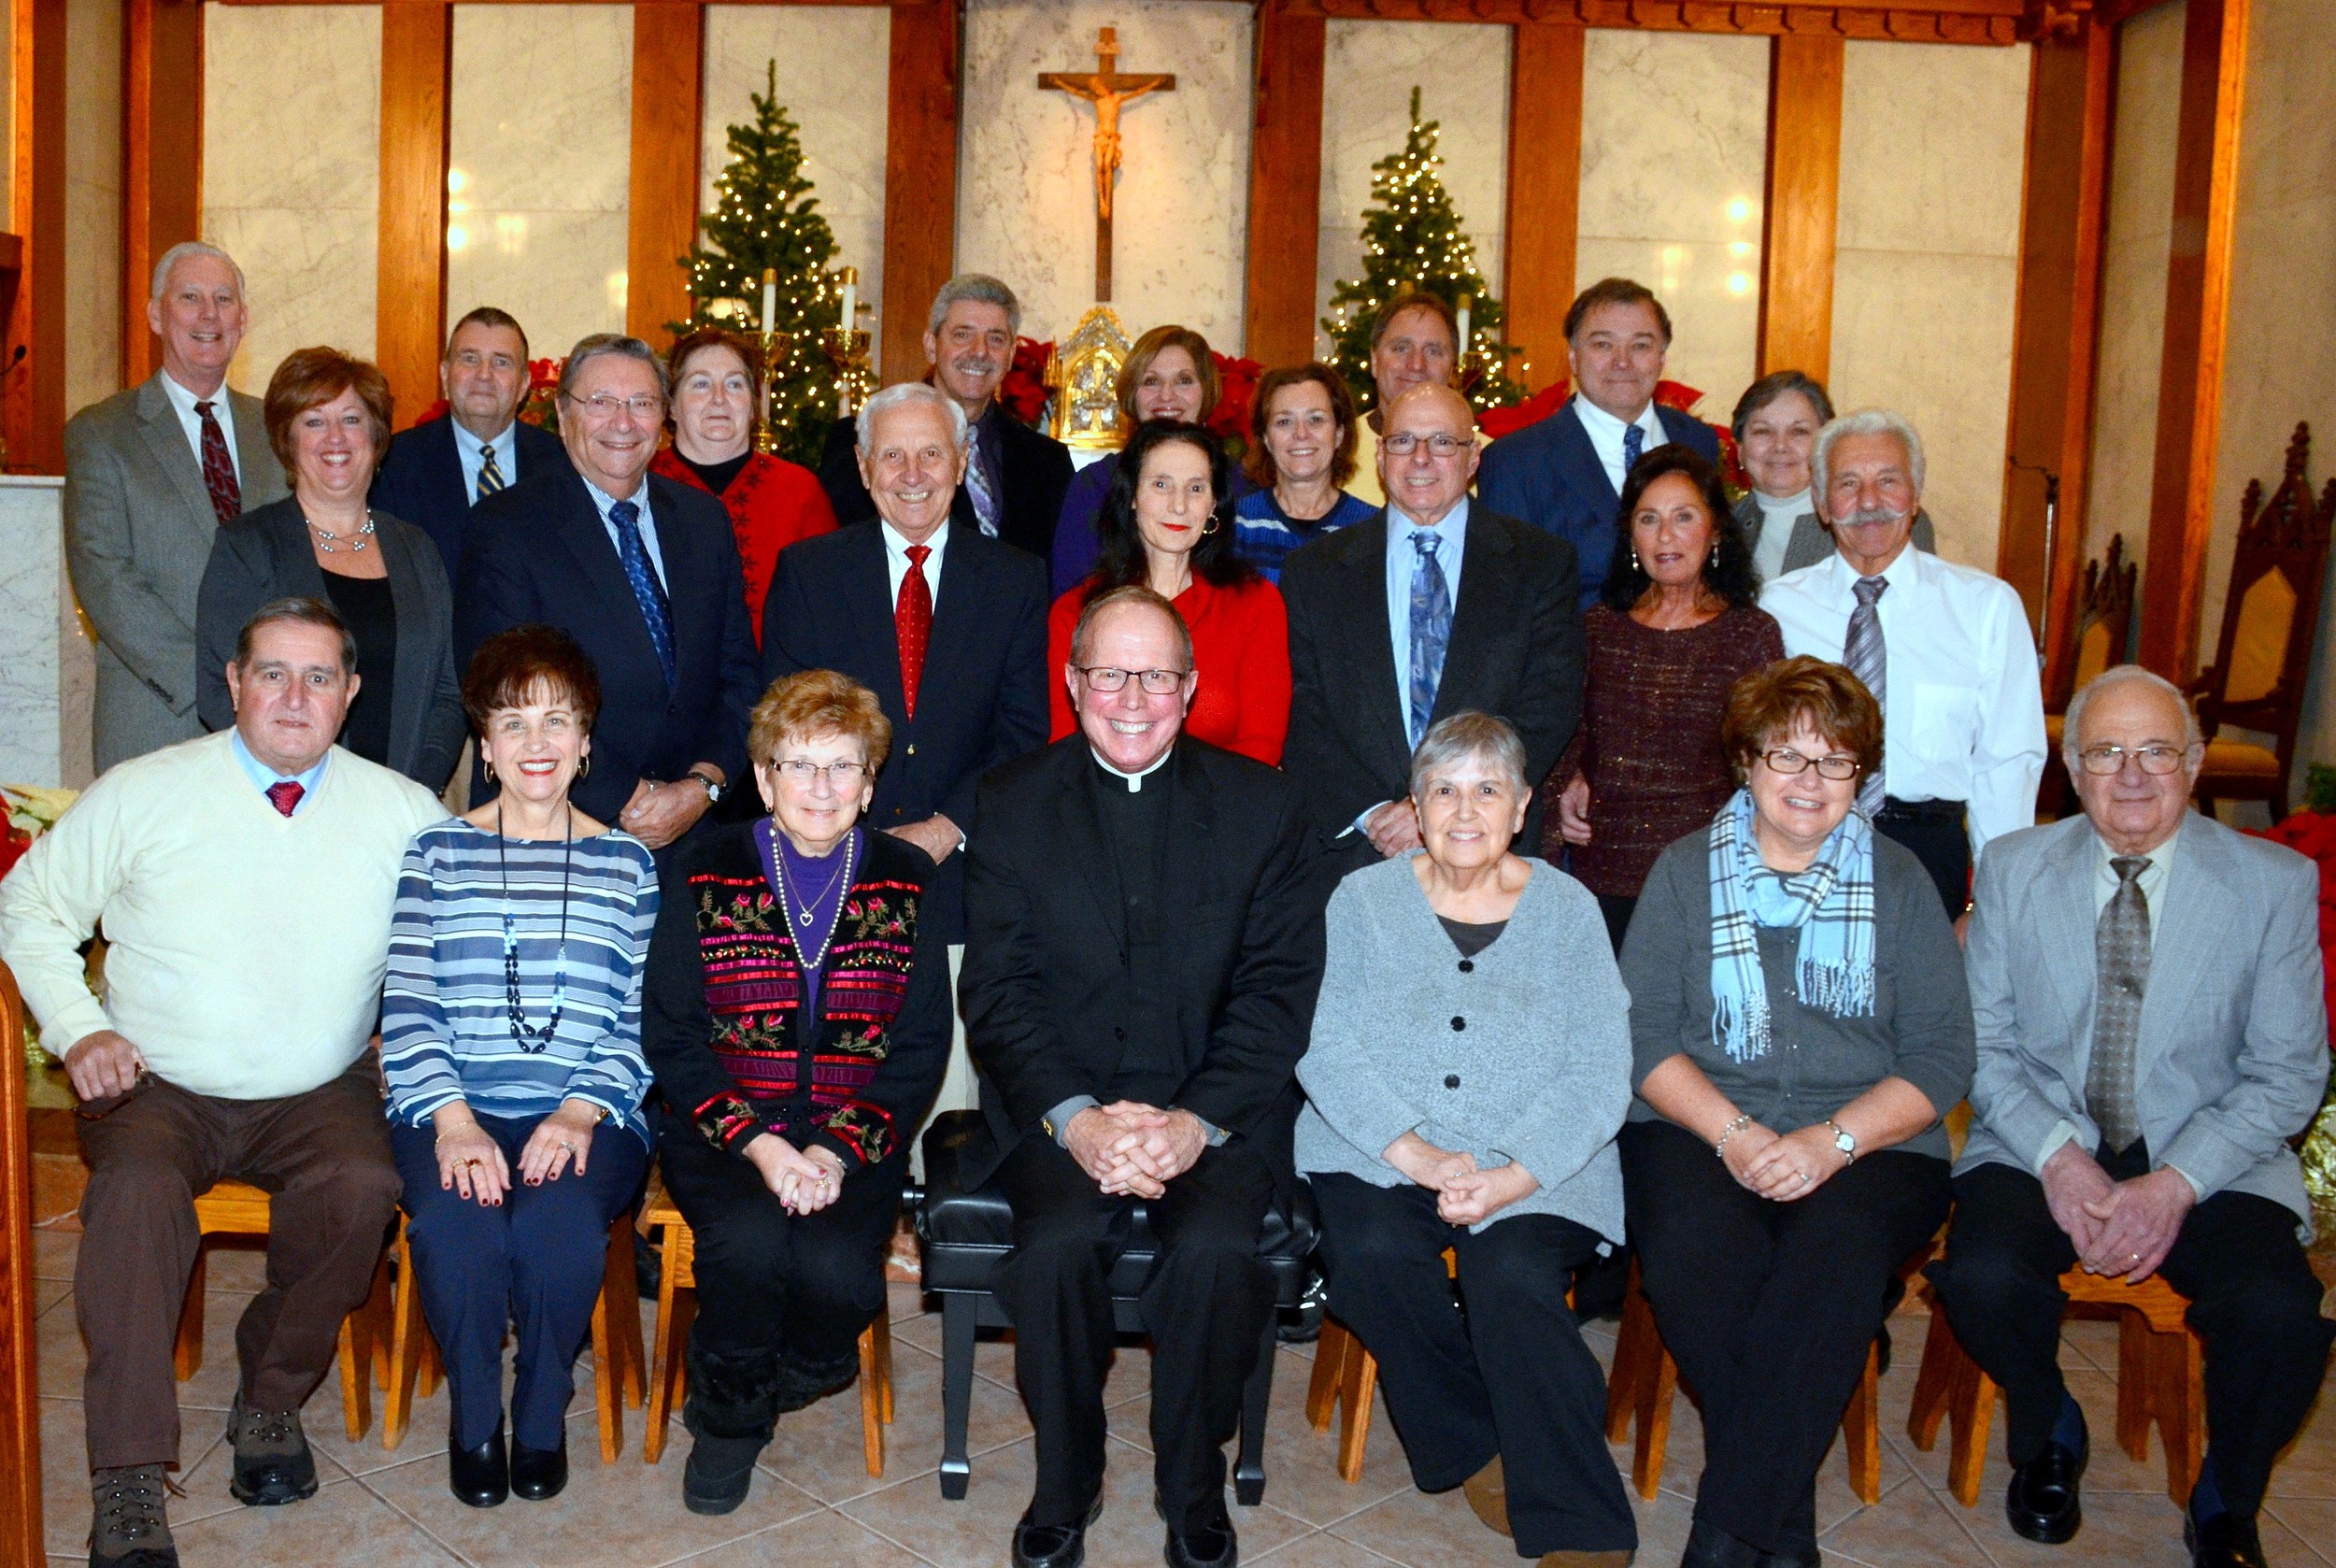 Past Chief Marshals of the Our Lady of Mt. Carmel Church Feast gathered for a group photo (with pastor Henry P. Zinno Jr. (seated front row center) Saturday as part of the church's 100th anniversary celebration, which officially began this past weekend. They include front row left-right Manny Pasqual, Theresa Pasqual, Gloria Pasqual, Madeline Grimo, Betty Vendituoli, and Frank Vaccaro. Second row left-right are Donna McKenna, Richard Carlone, Joseph Caromile, Caroline Campagna, Vincent Campagna, Joan Castigliego, and Nick Castigliego. Back row left- right are Bob McKenna, Jeff Steadman, Alisa Steadman, Paul Viveiros, Carol Viveiros, Tammie Delmage, Bill Delmage, Bob Ruginis, and Kathy Ruginis.